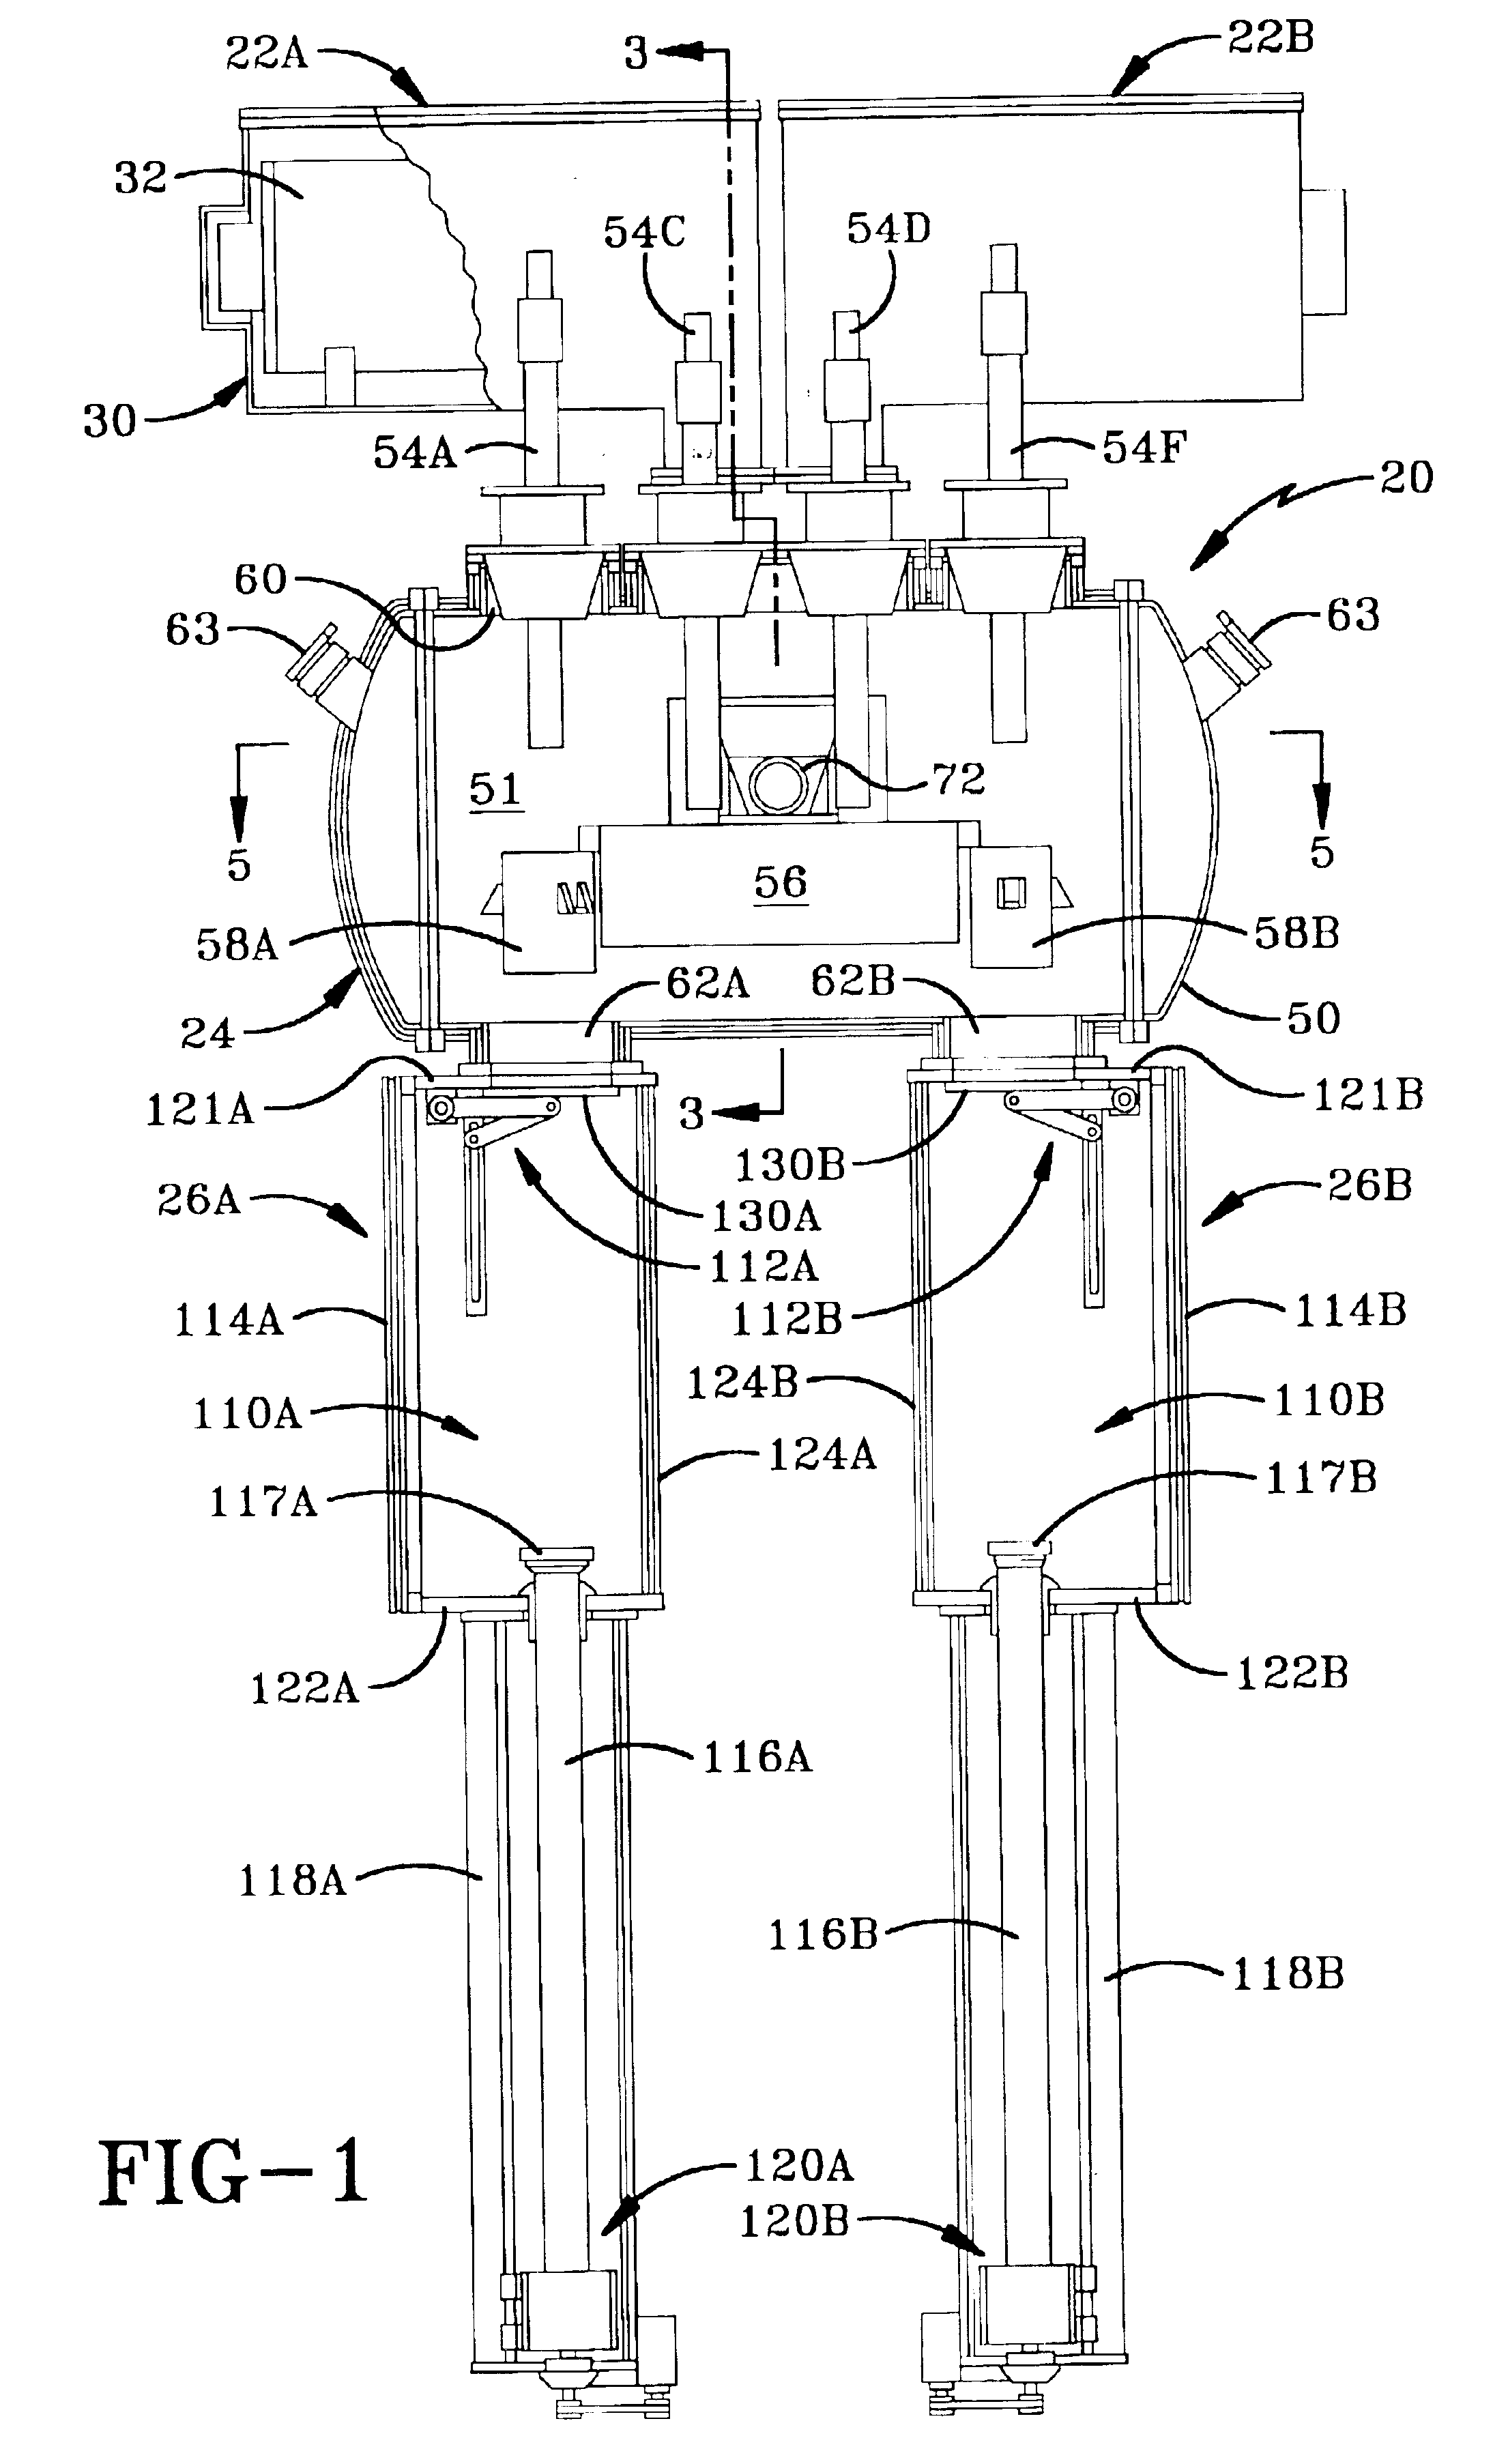 Method and apparatus for alternating pouring from common hearth in plasma furnace